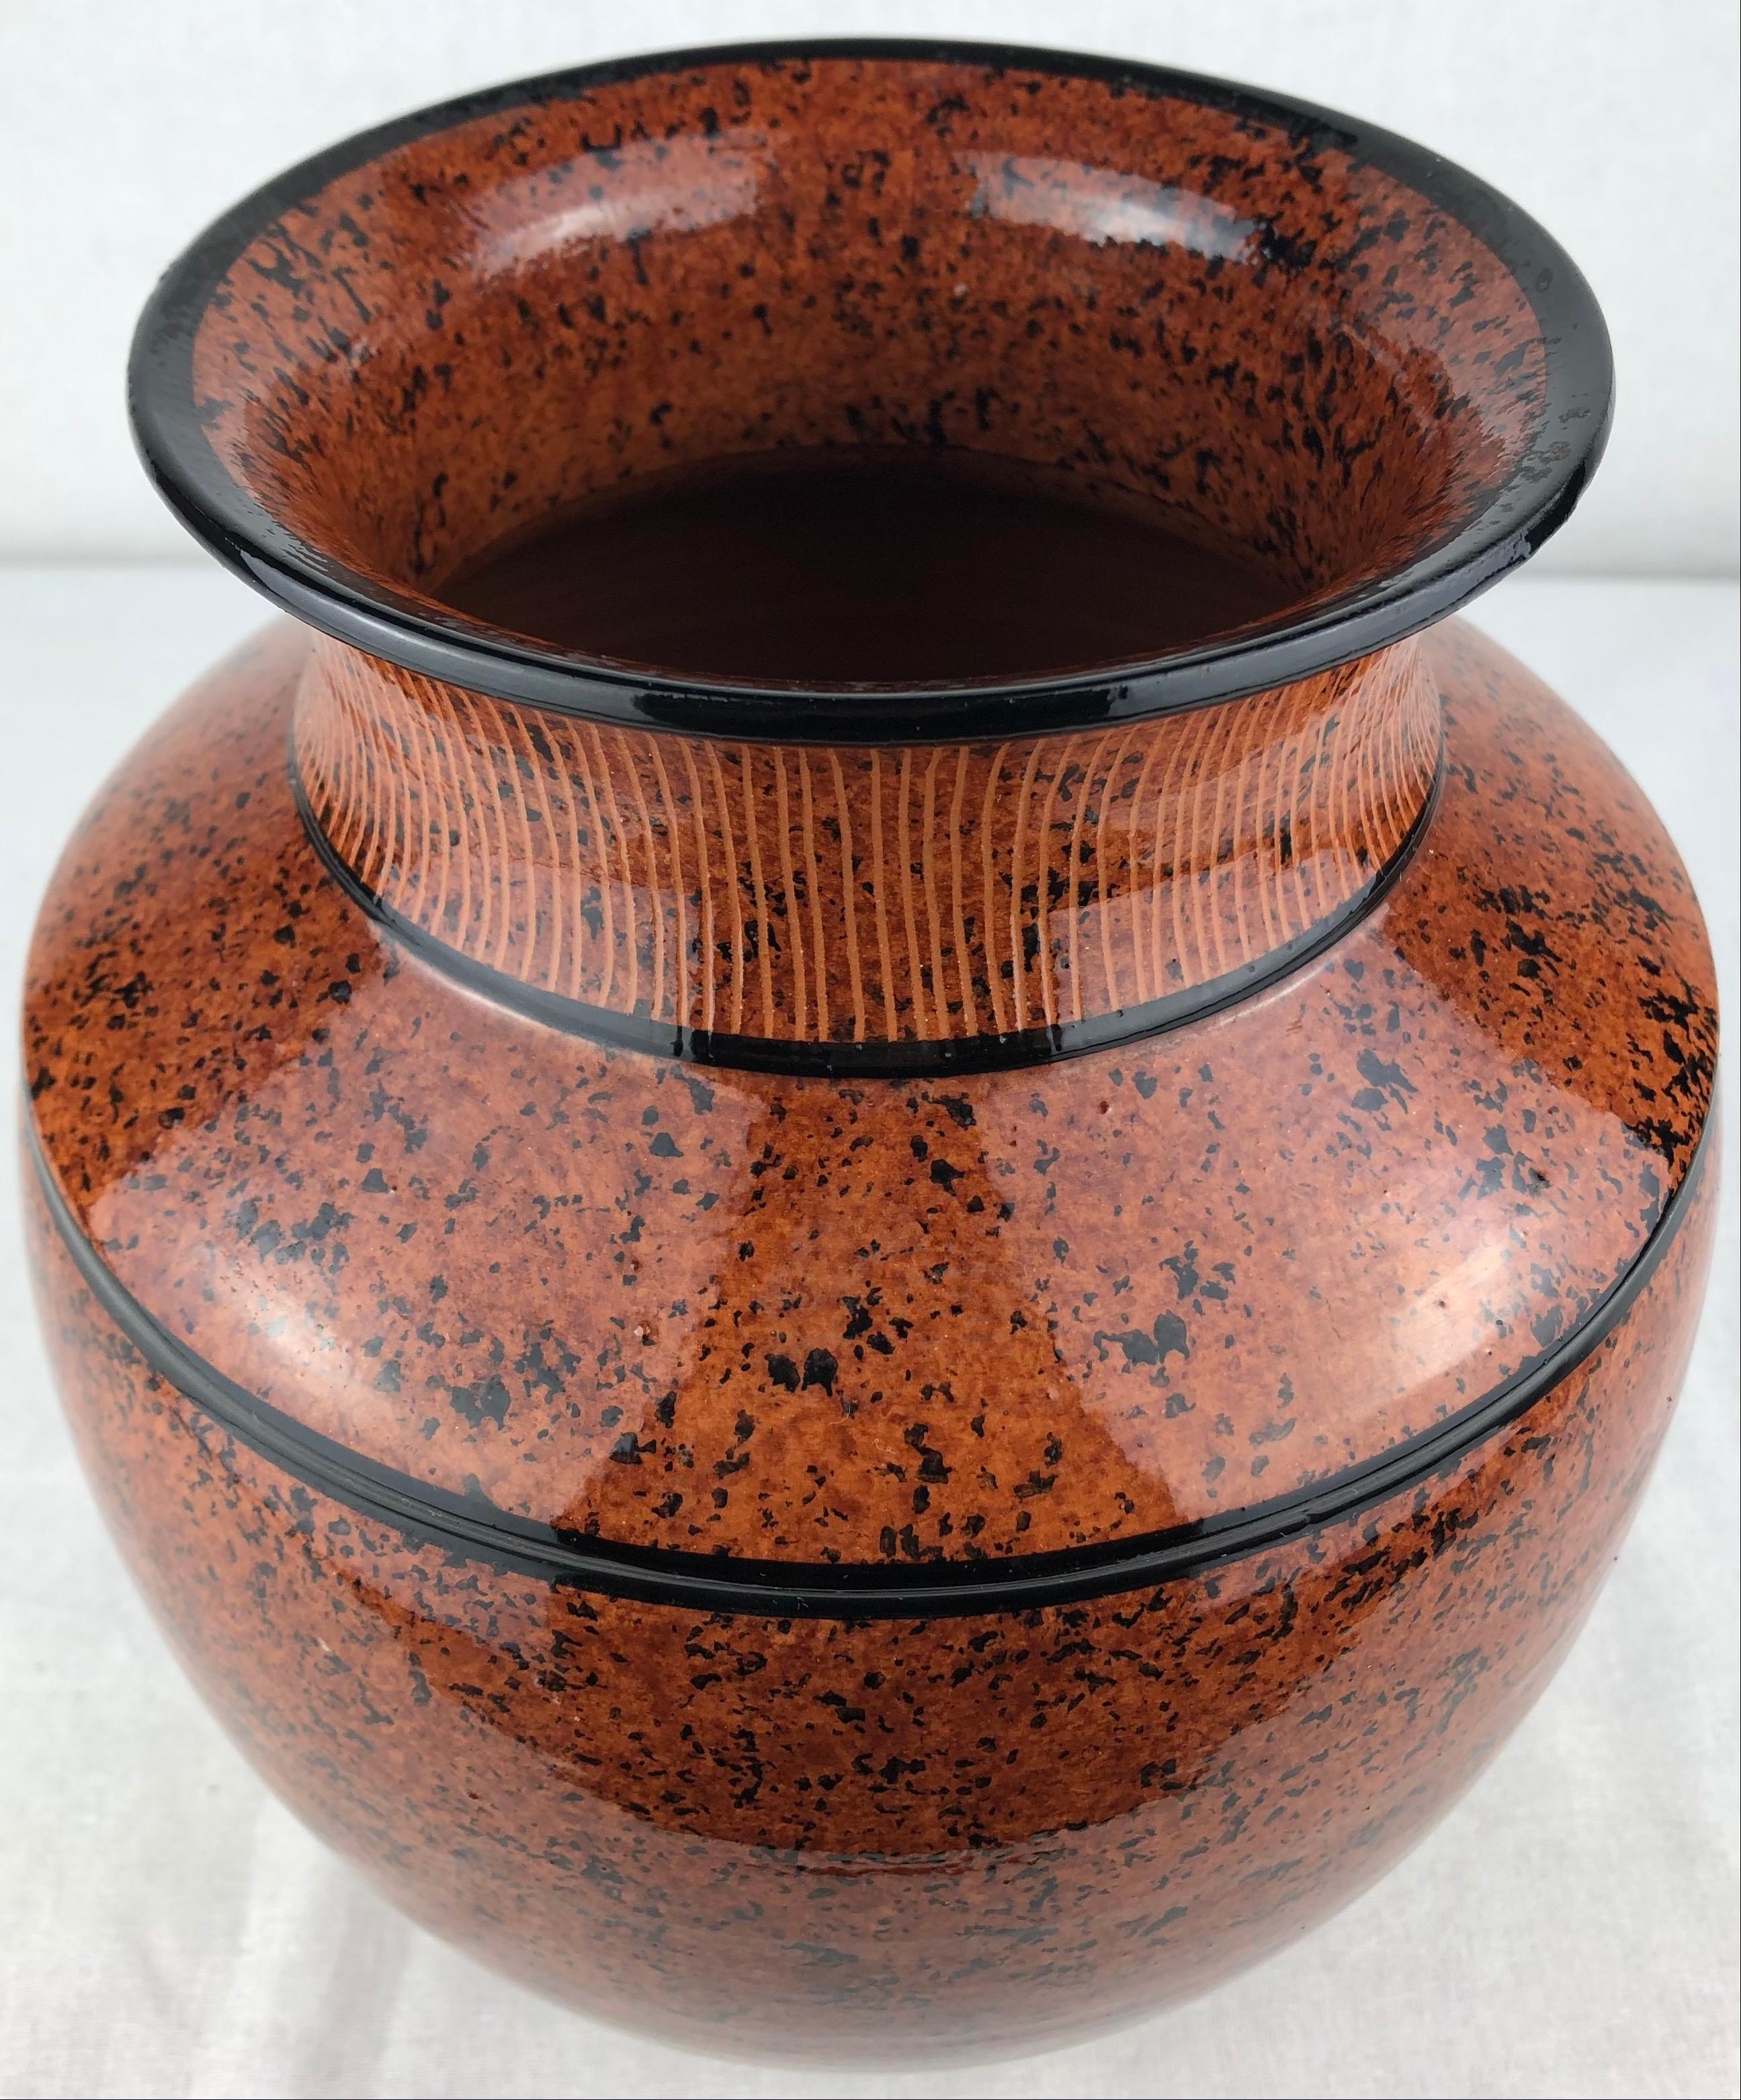 This dazzling glazed French Art Deco style ceramic vase or small planter was handcrafted. The mixture of colors are truly beautiful. Signed Picout.

It can enhance any shelf, table, credenza or countertop as it is truly an interesting decorative